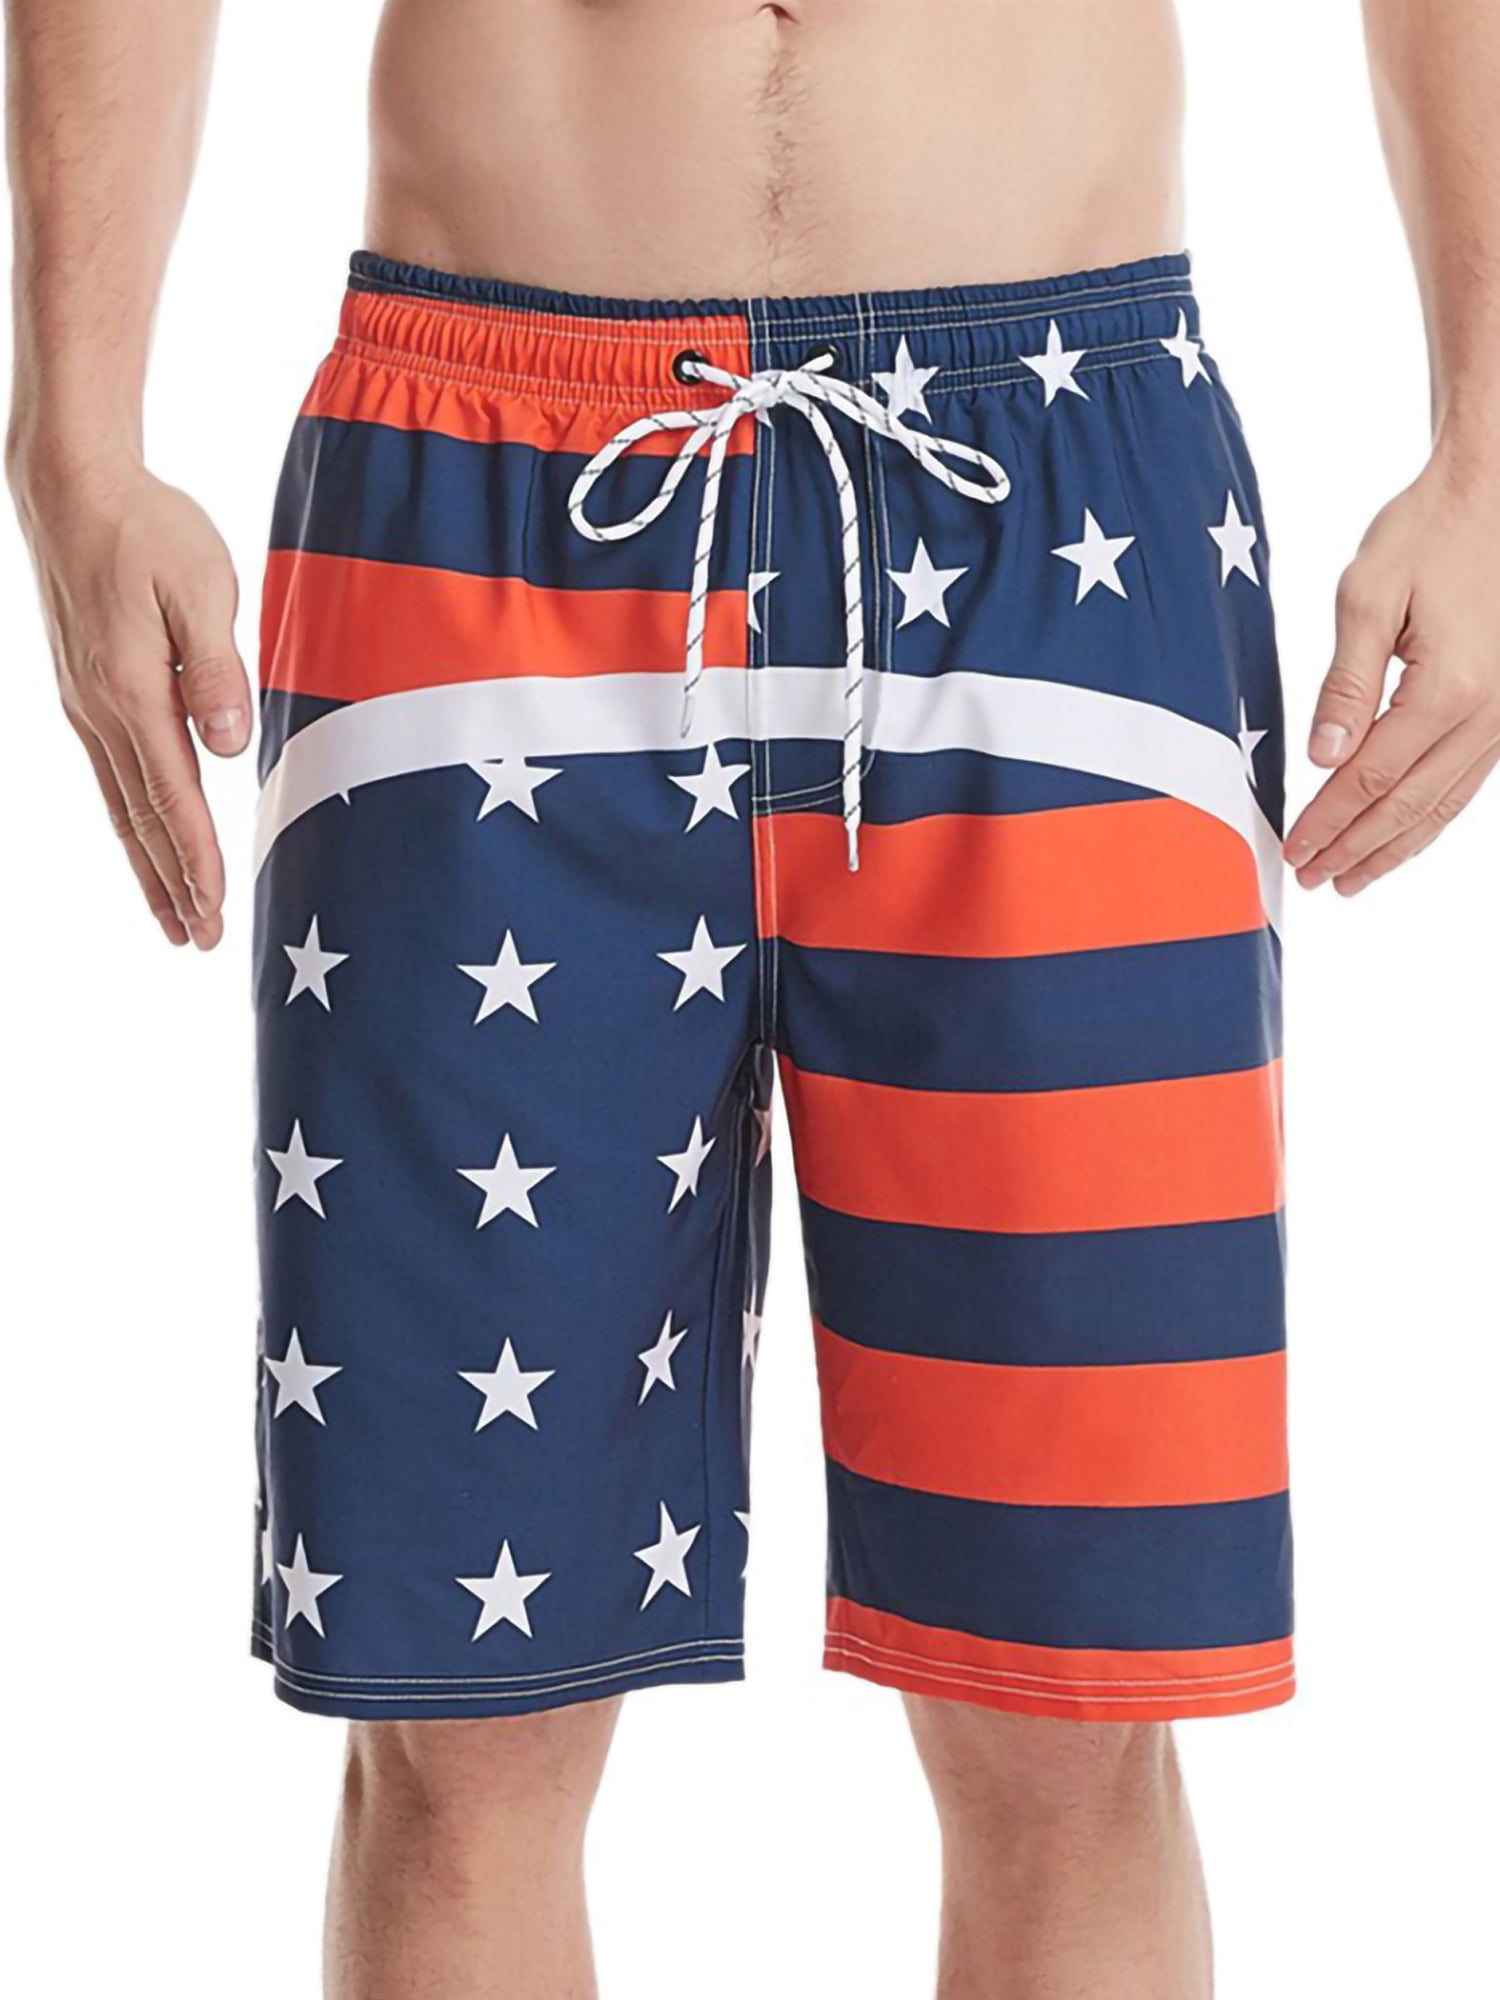 Mens Swim Trunks Oral Hygiene for Dentistry Printed Beach Board Shorts with Pockets Cool Novelty Bathing Suits for Teen Boys 